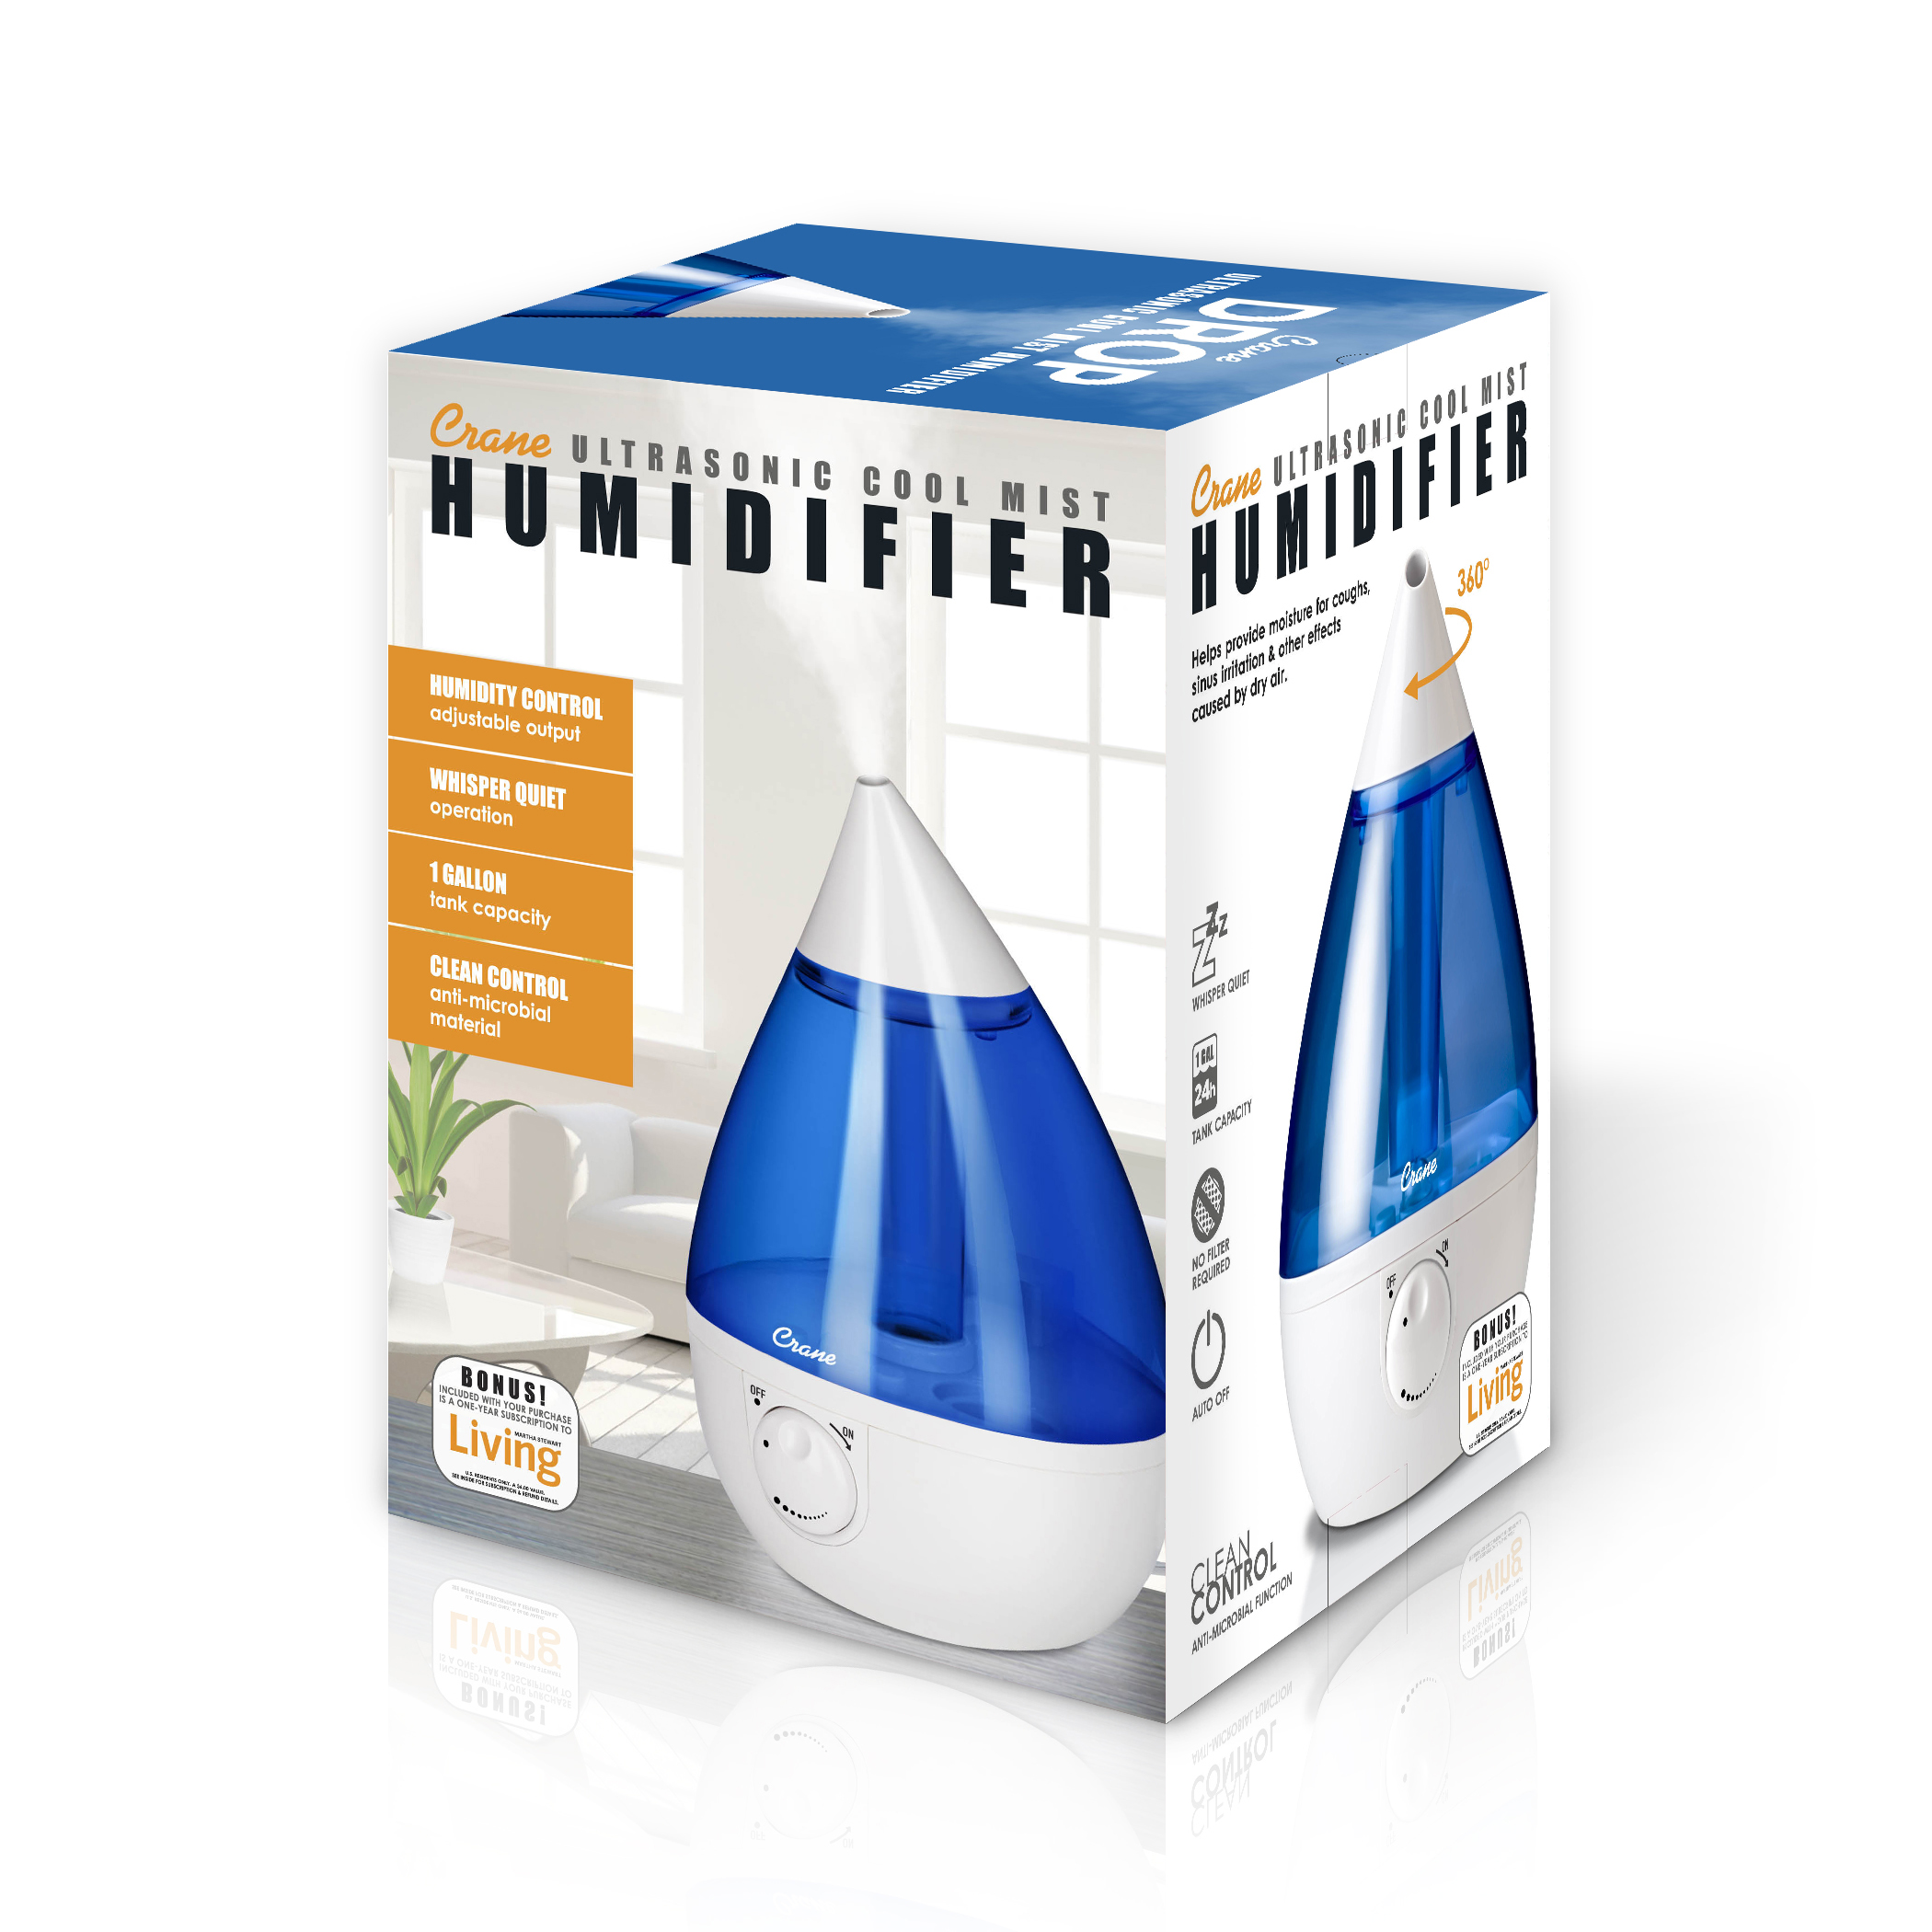 Crane Drop Ultrasonic Cool Mist Humidifier, 1.0 Gallon, 24 Hour Run Time, Whisper Quiet, 500 Sq. Ft. Coverage, Blue/White - image 4 of 10